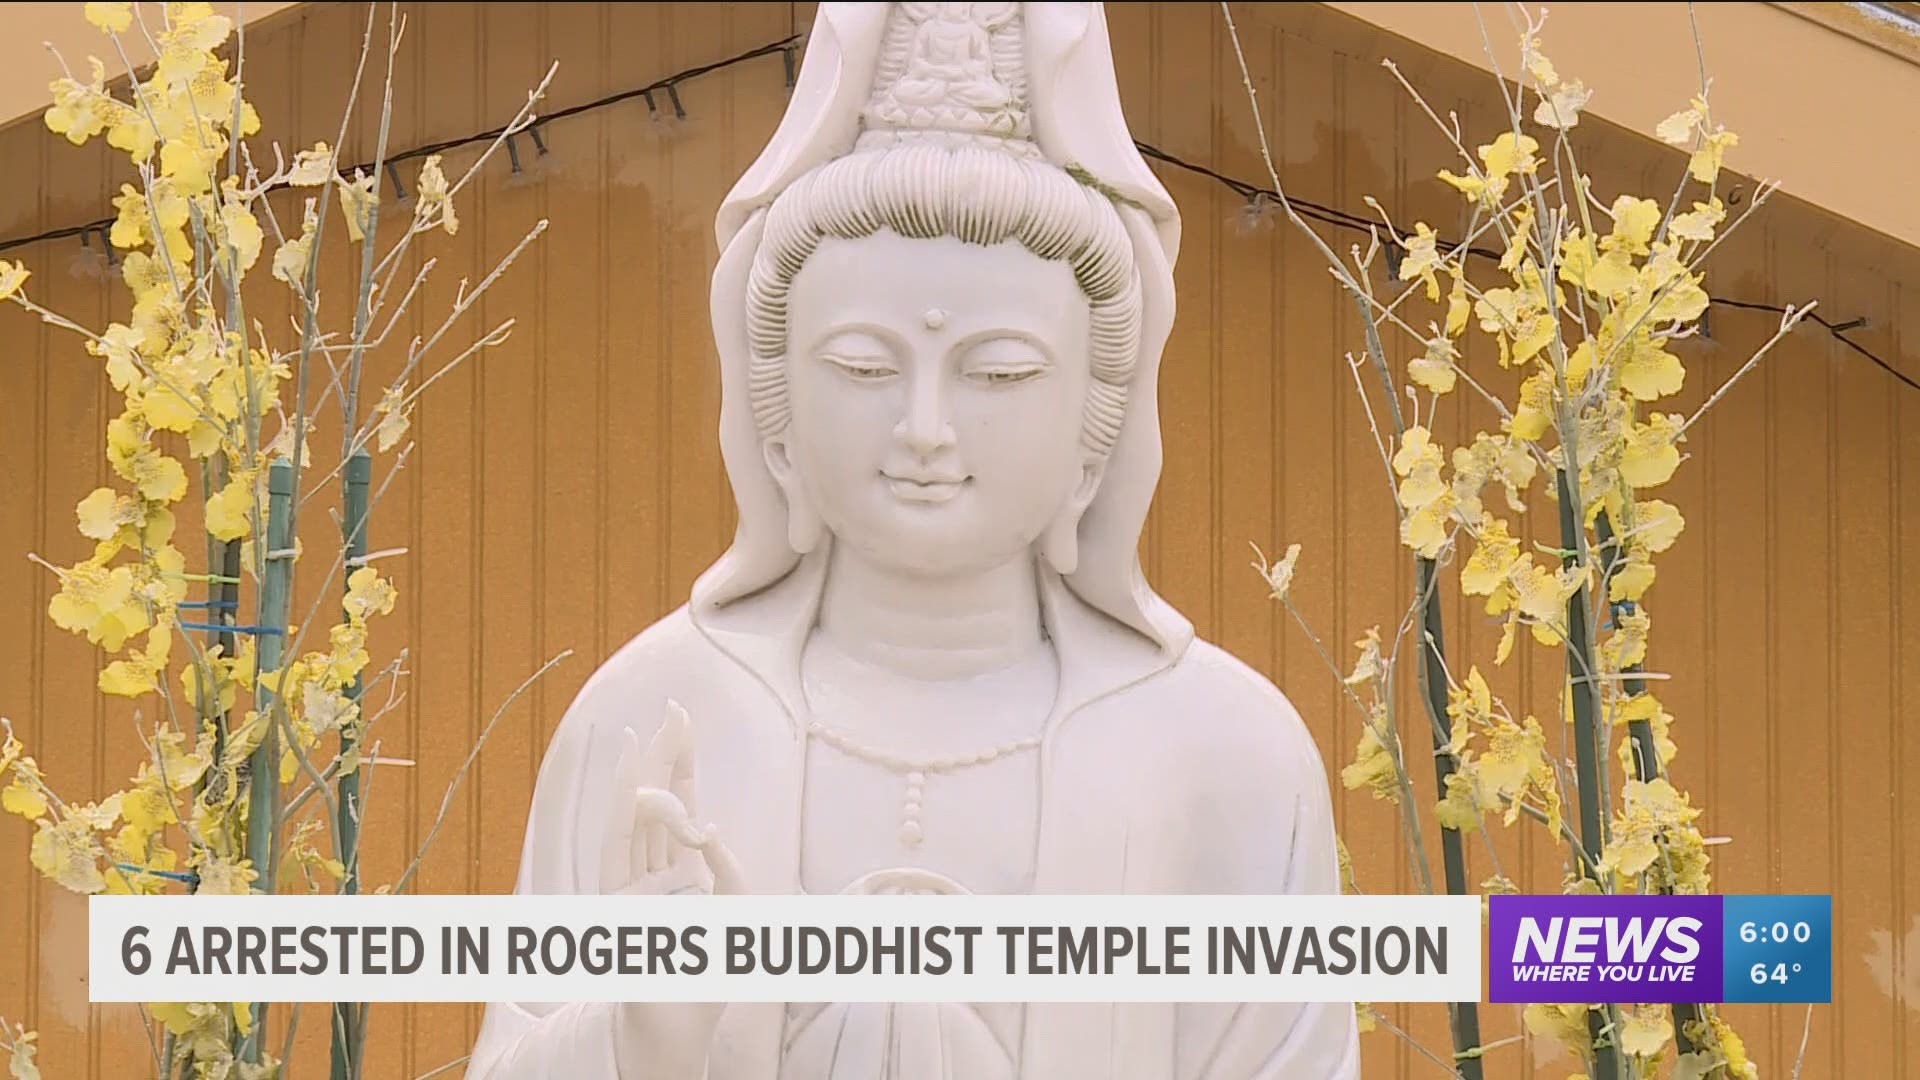 Police say six Romanian nationals have been arrested and are believed to be part of a group targeting Buddhist temples across the country.